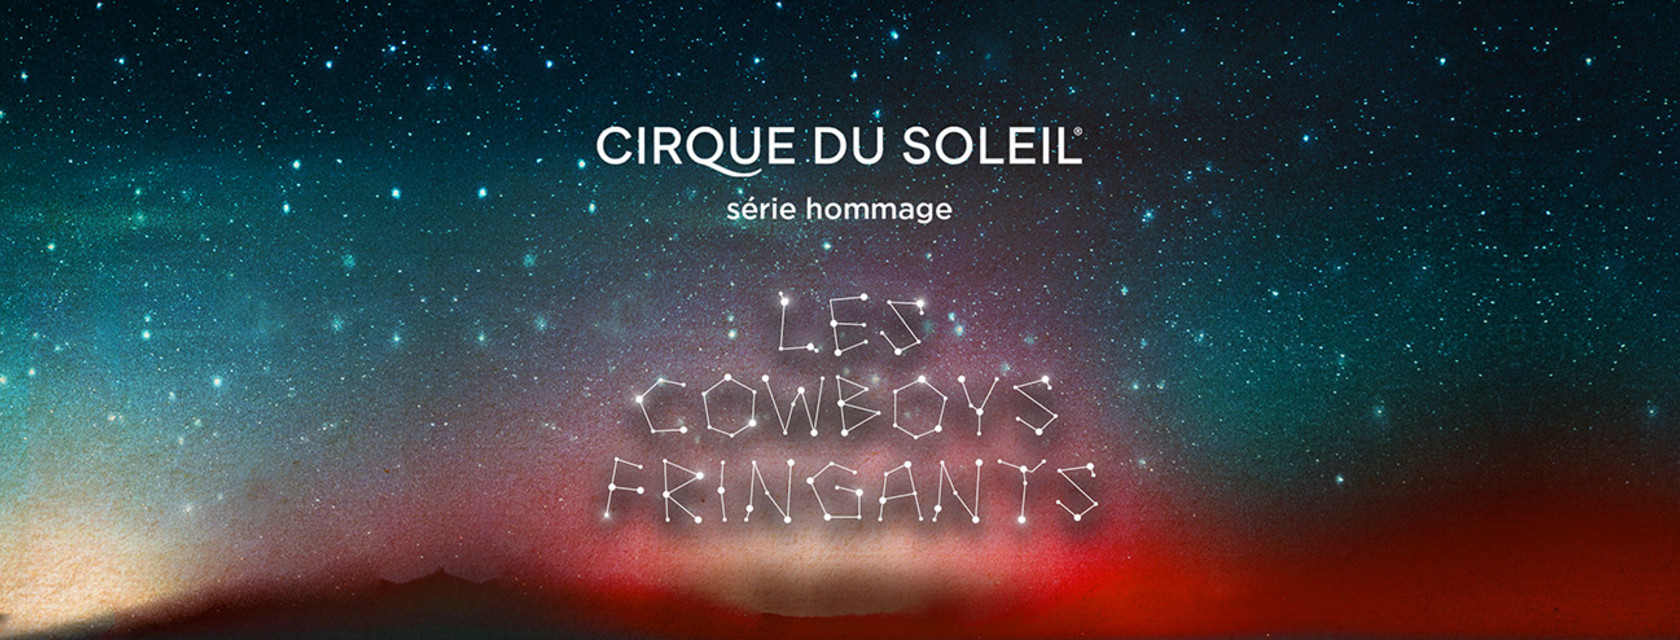 The fifth opus of the Cirque du Soleil Tribute Series will celebrate the work of the Cowboys Fringants